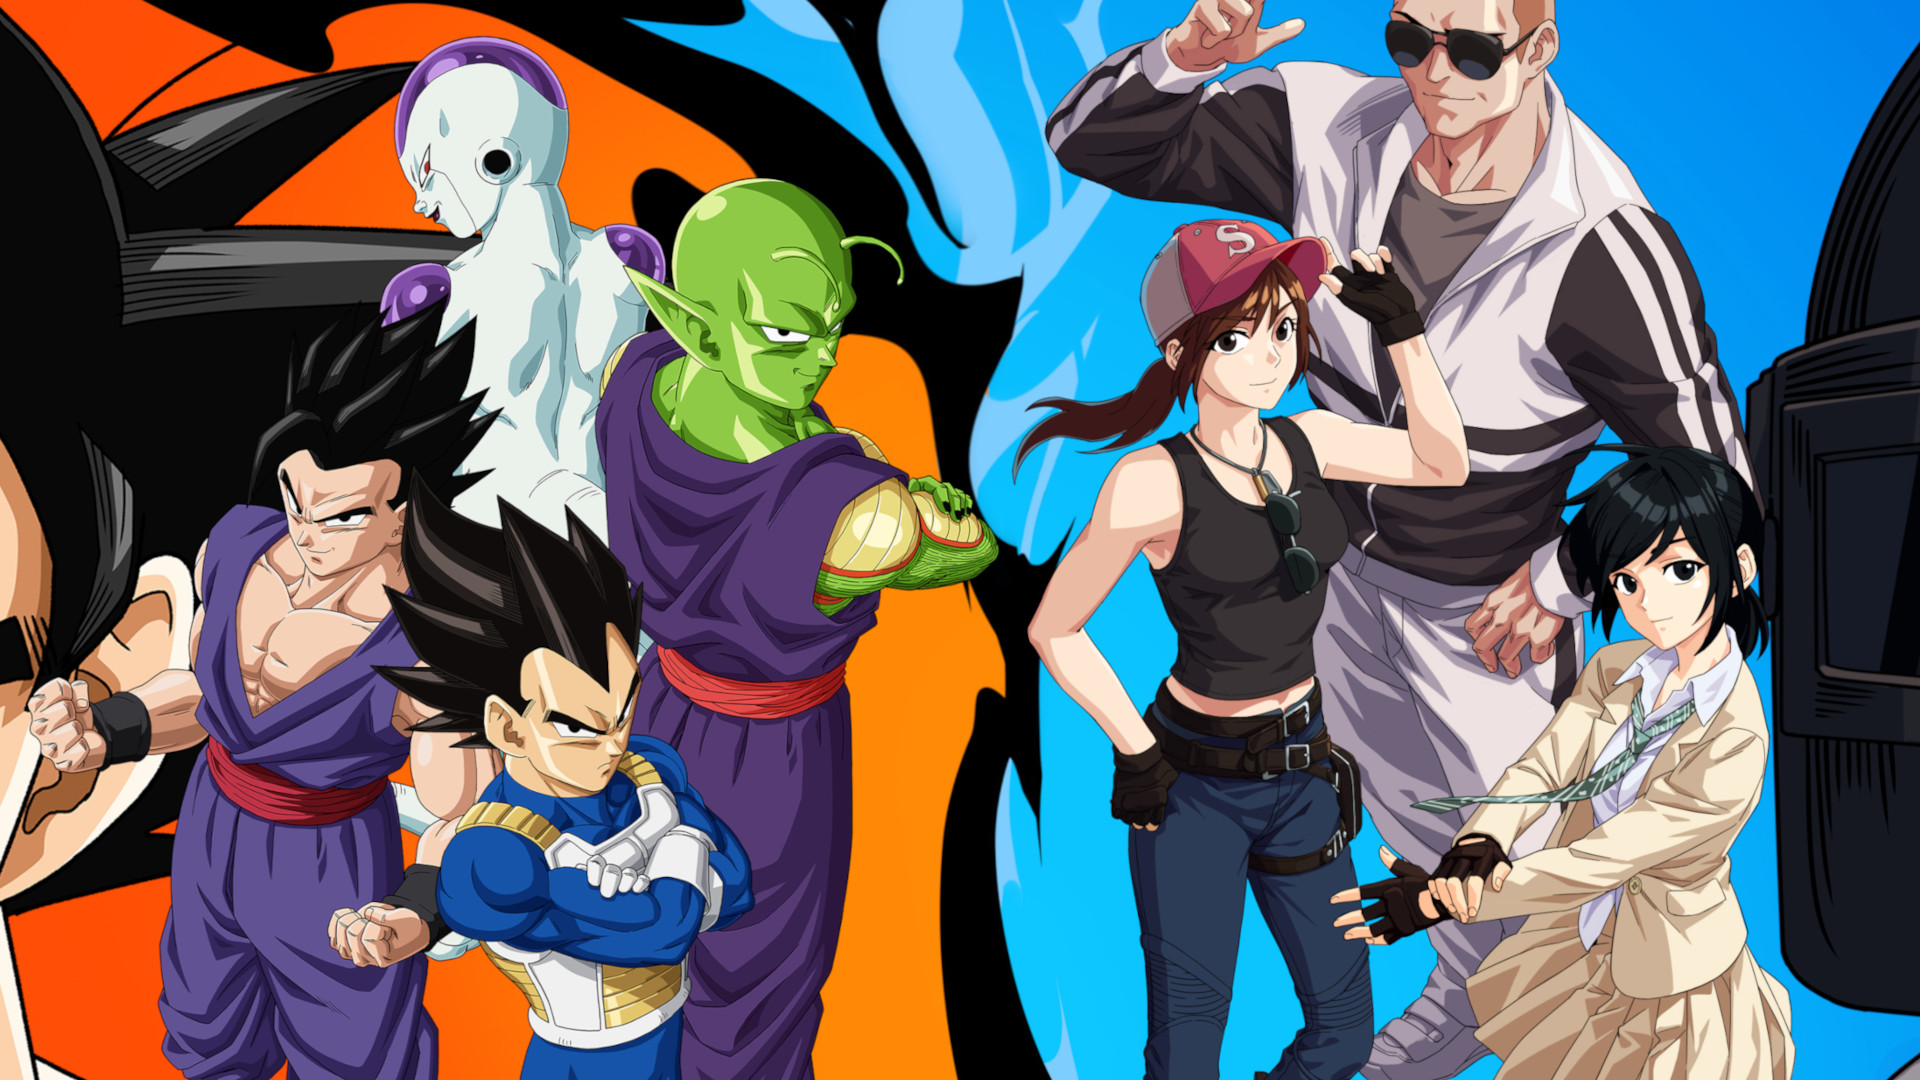 PUBG Mobile's Dragon Ball Super event adds all-new character sets